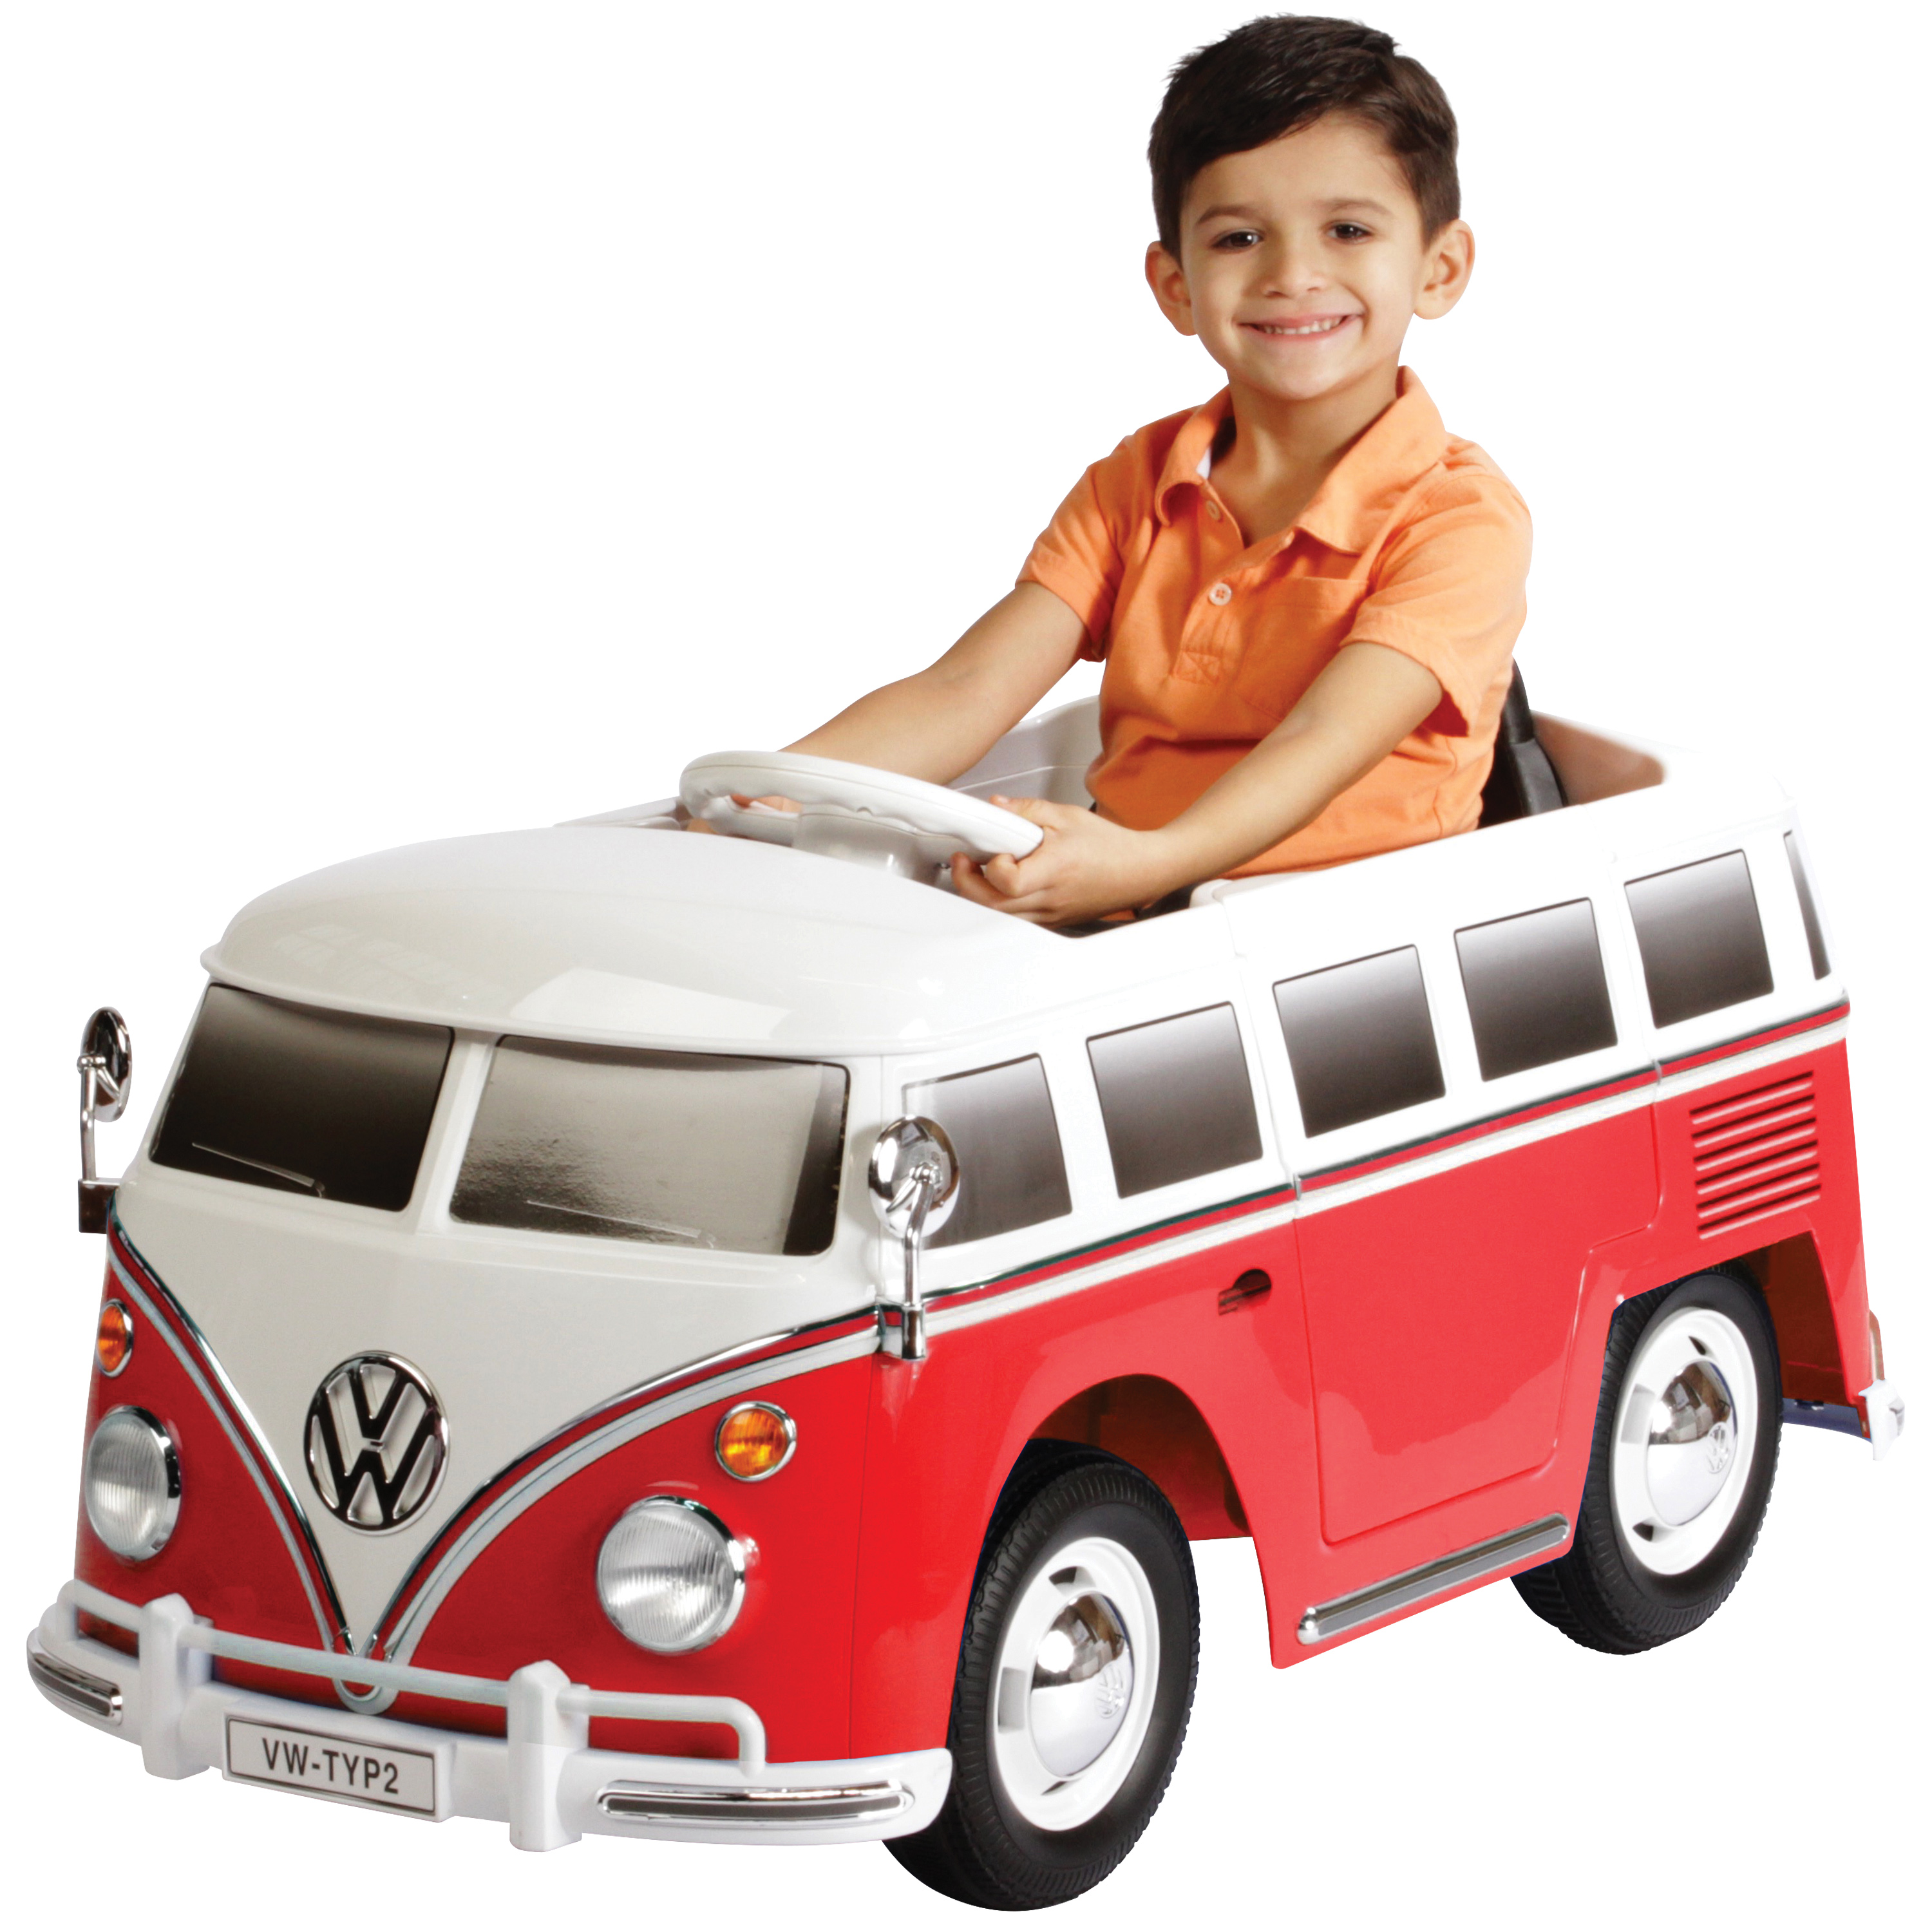 Rollplay VW Bus 6 Volt Battery Powered Ride-on Vehicle - Red - image 1 of 10